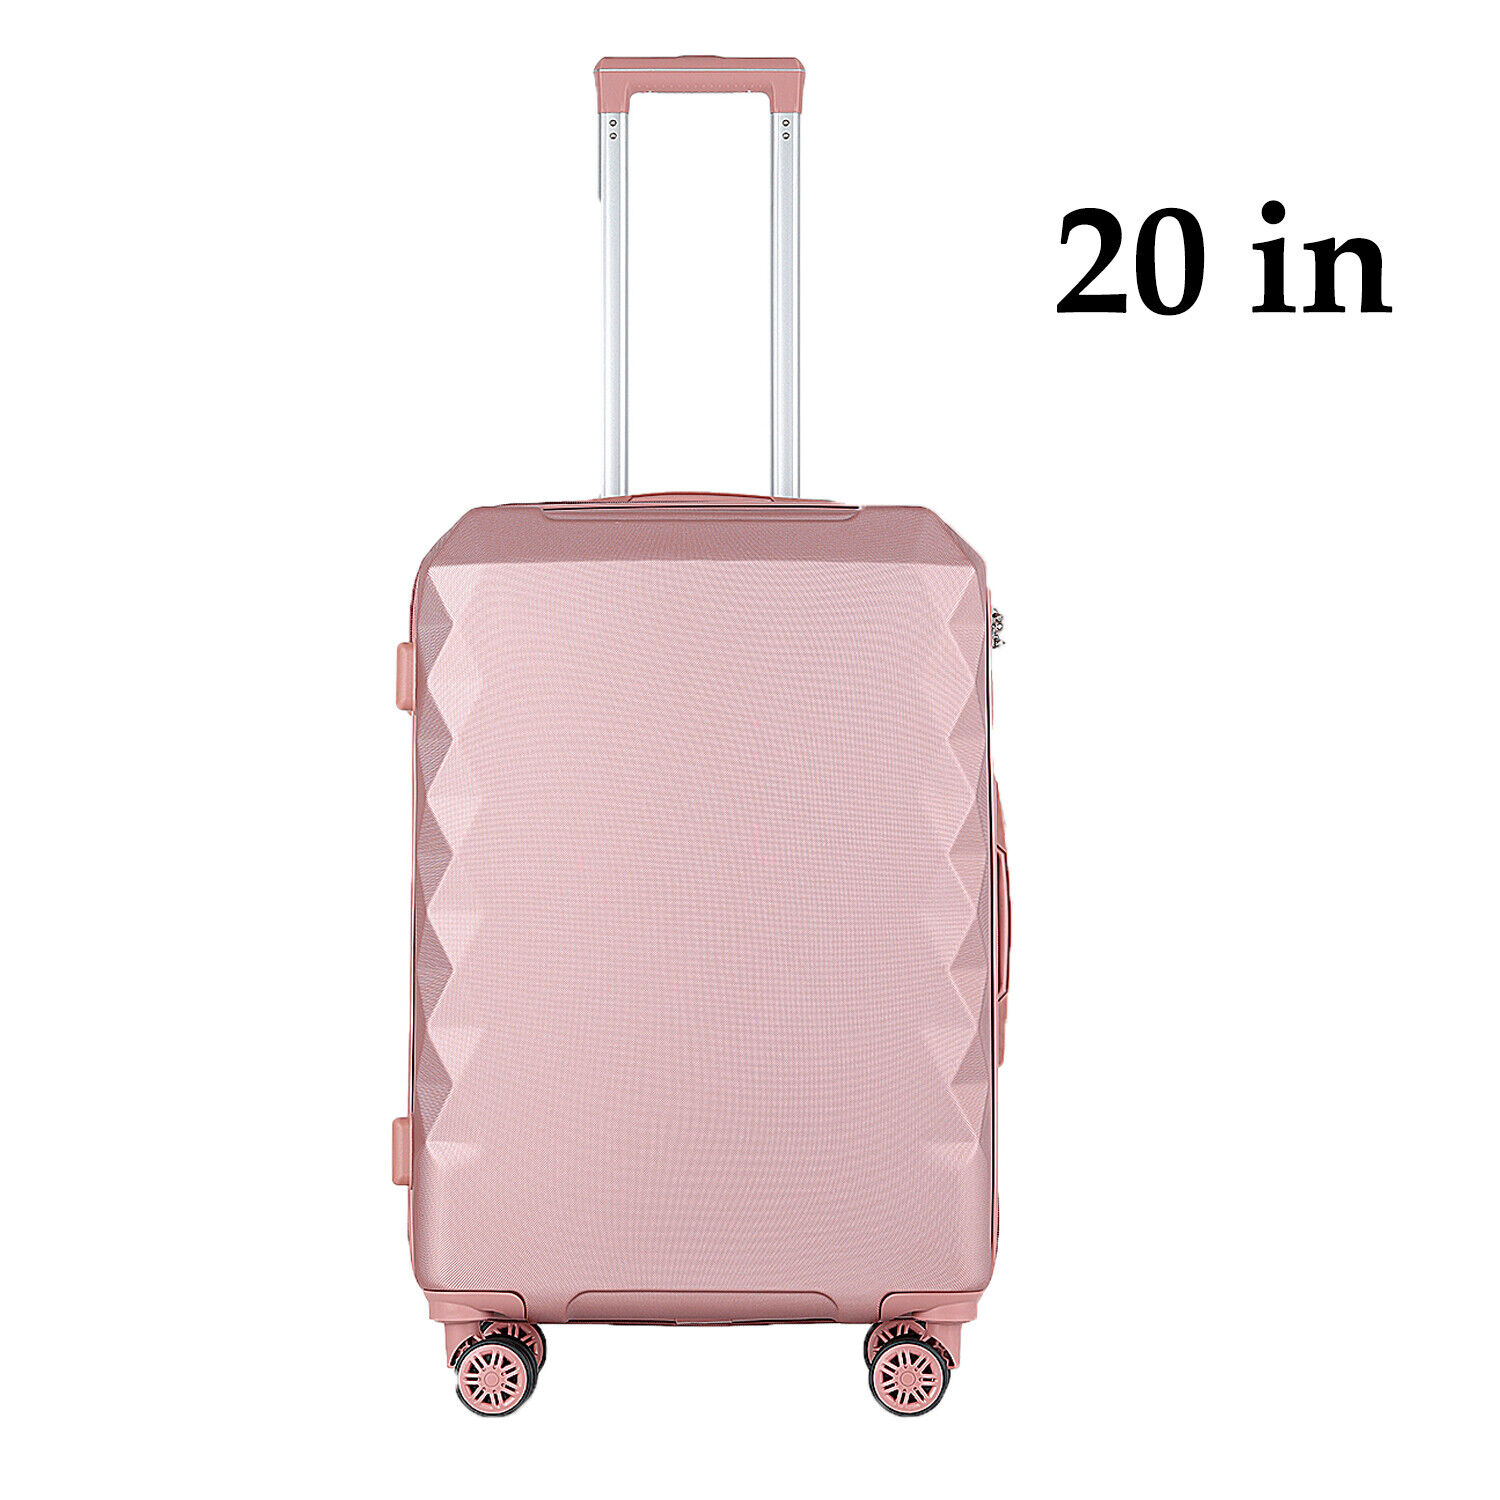 20 inch Carry-On Luggage Hard Shell Lightweight Suitcase with Spinner Wheels